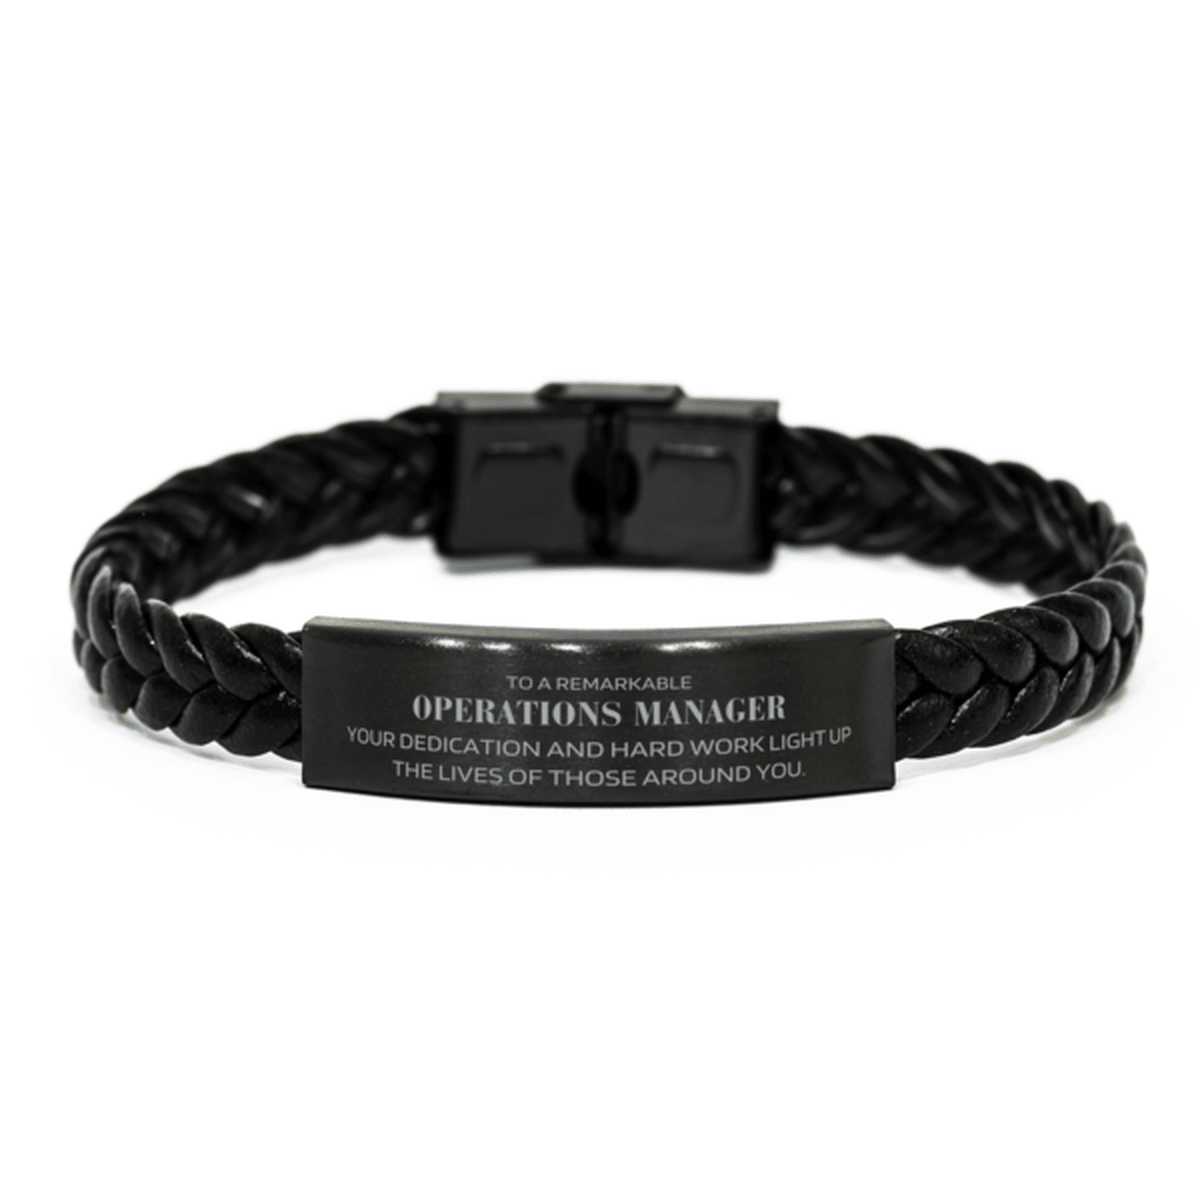 Remarkable Operations Manager Gifts, Your dedication and hard work, Inspirational Birthday Christmas Unique Braided Leather Bracelet For Operations Manager, Coworkers, Men, Women, Friends